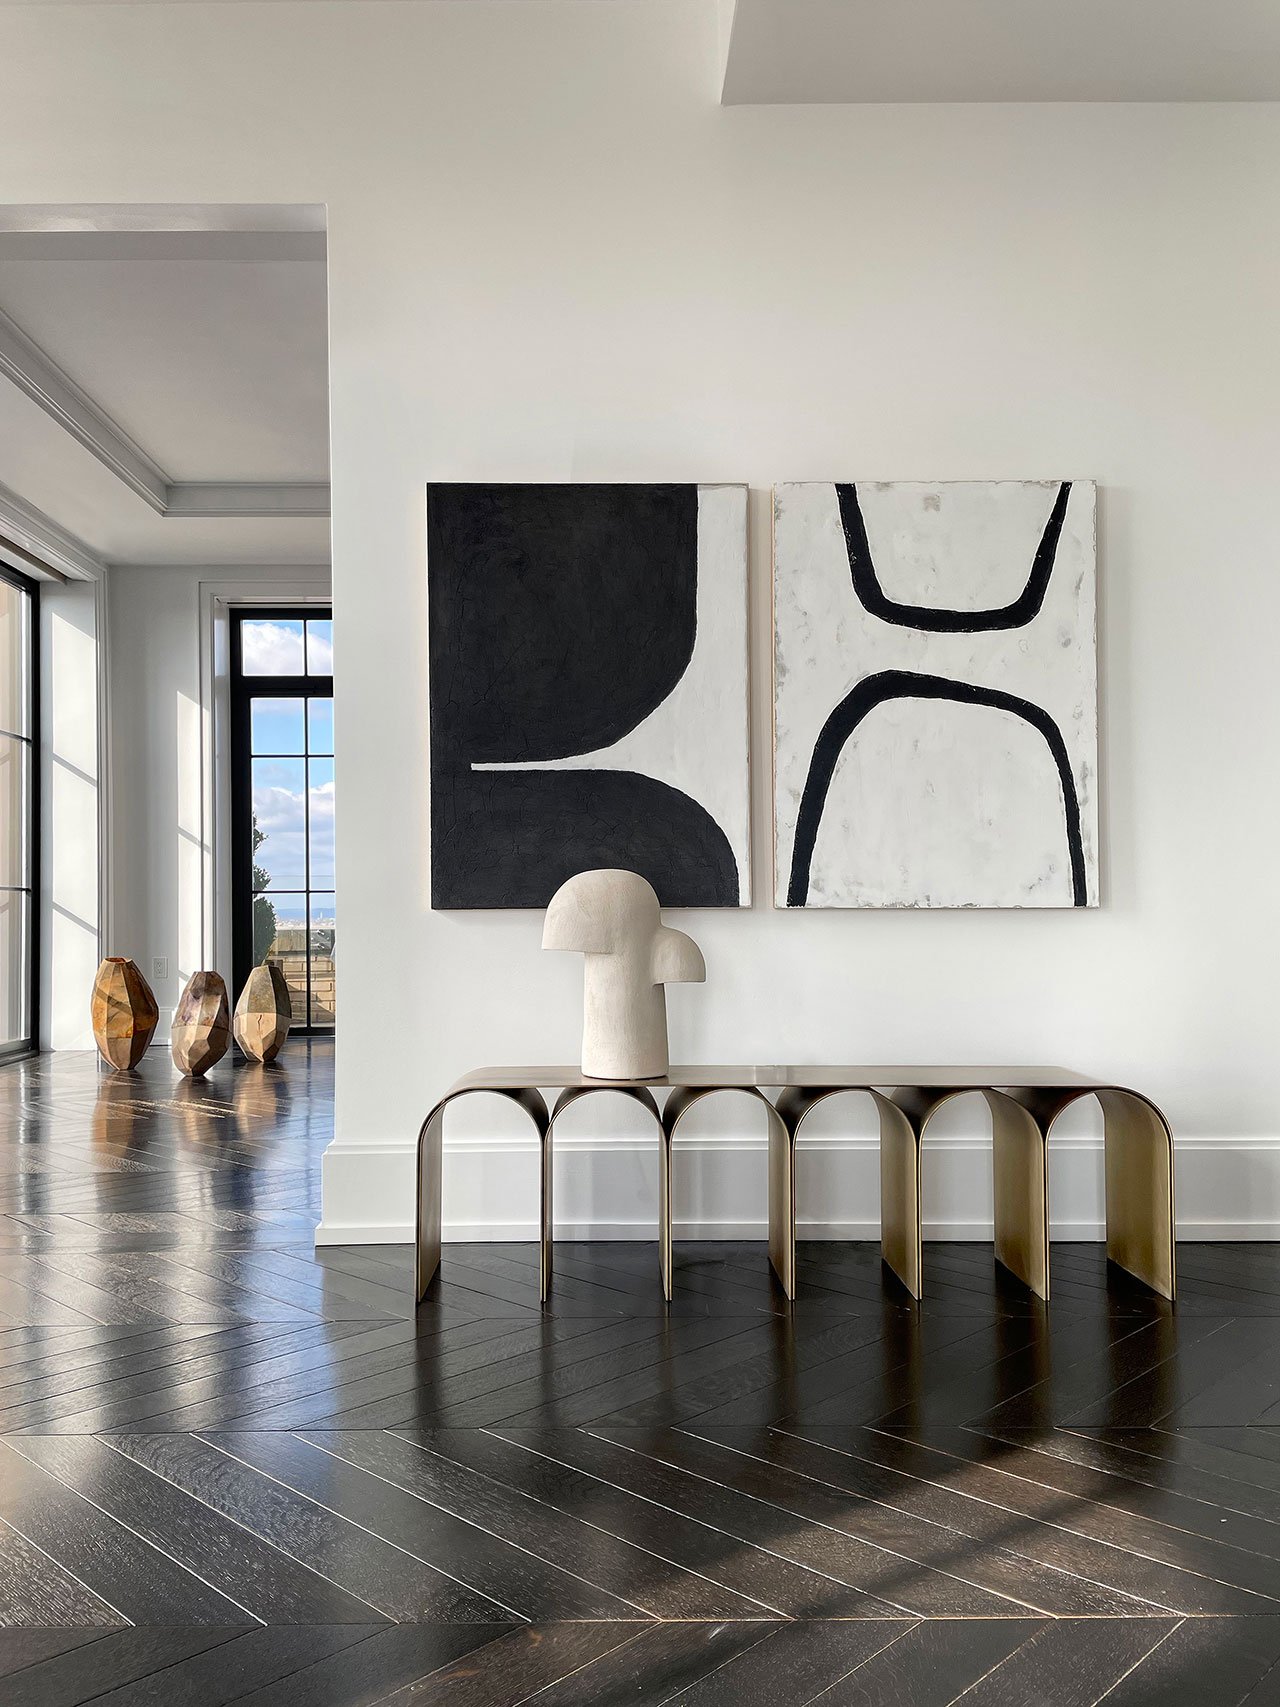 Galerie Philia at Walker Tower, Chelsea, New York. Courtesy of Galerie Philia.
Featured: 
Fino Prydz, Untitled 13 &amp; Untitled 11, 2020. Plaster, gesso, indian ink, cold wax on birch panel. 76.2cm x 101.6cm.
Elisa Uberti, Édifice table lamp, 2020. White stoneware. 44 x 34 x 18 cm.
Pietro Franceschini, Brass Gold Arch Bench, 2020. Brass. 155 x 33 x 43 cm.